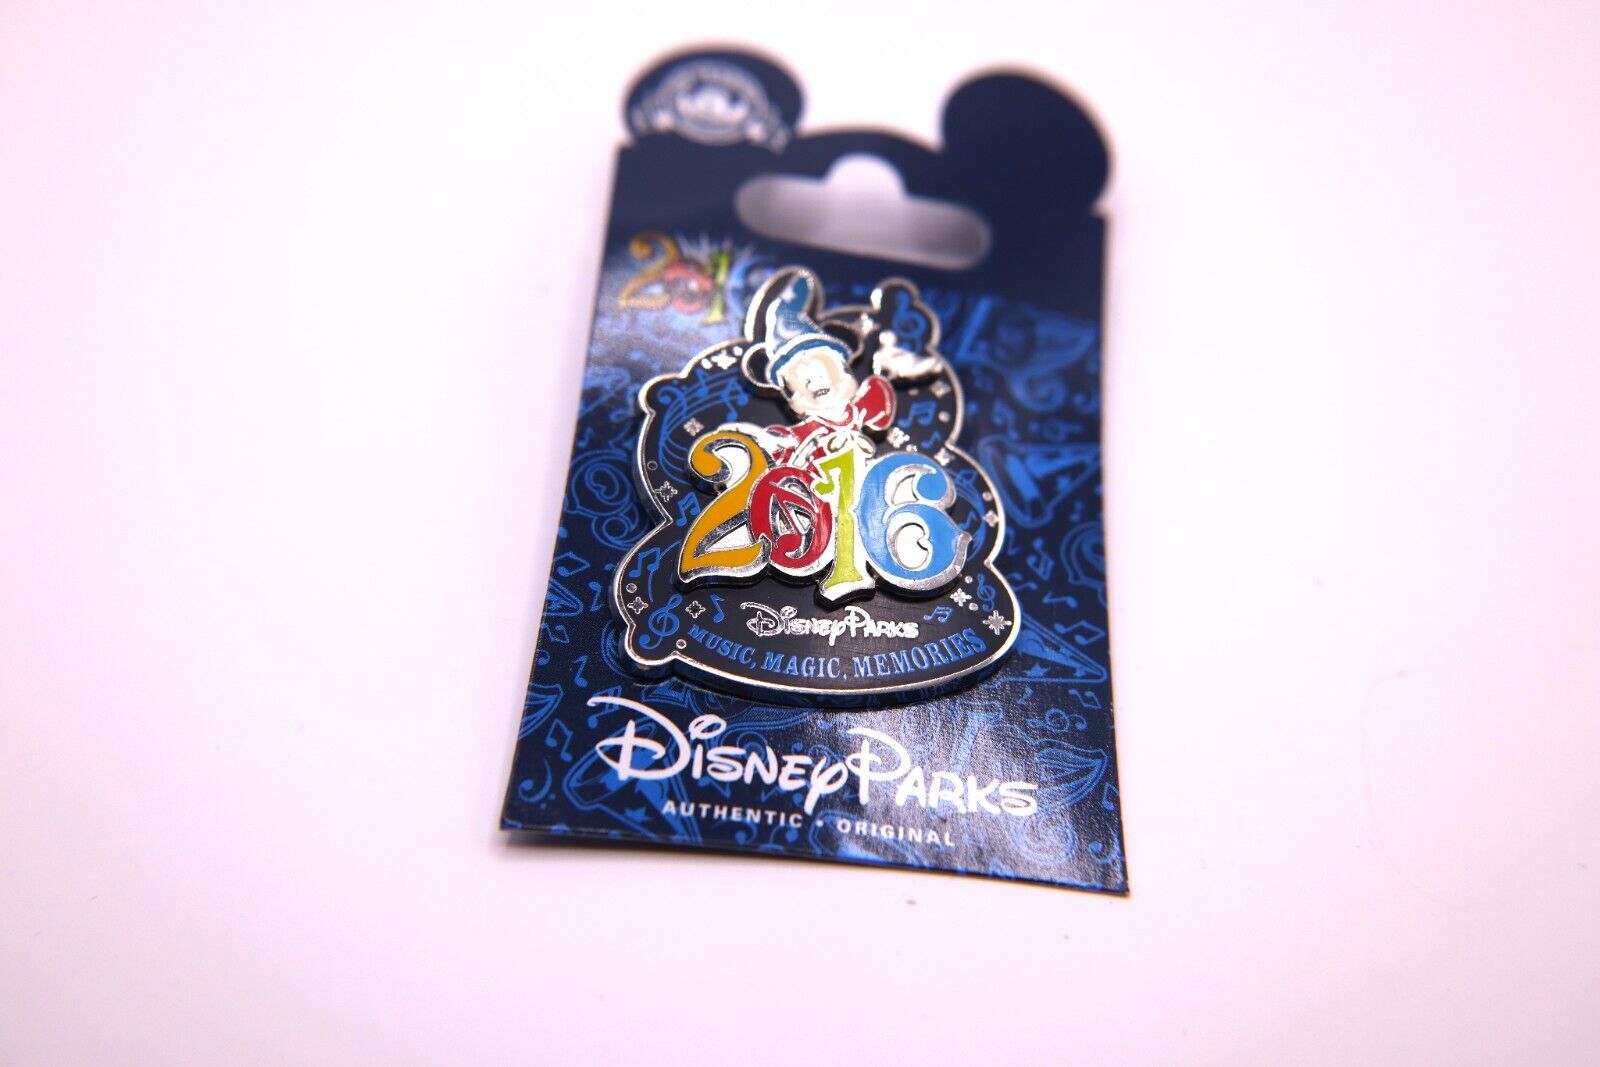 Disney Mickey Mouse Sorcerer 2016 Memories Mystery collection pin